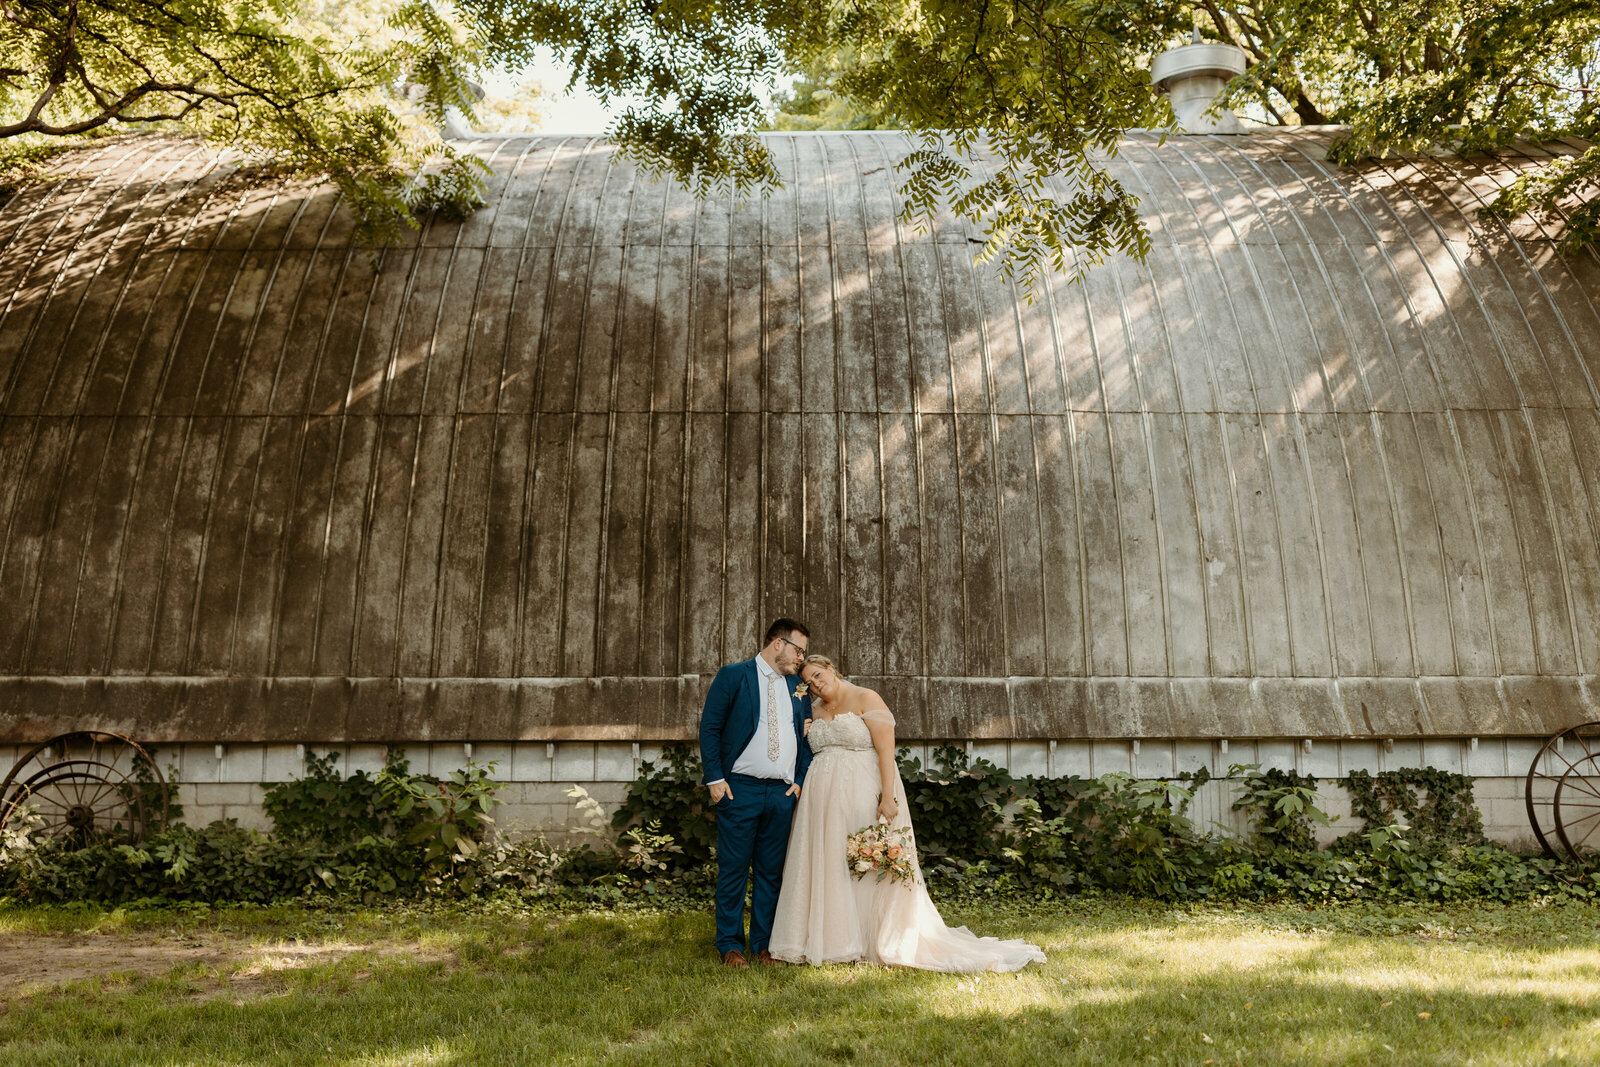 Wedding at the Vintage Rose Barn in Gobles, Michigan.